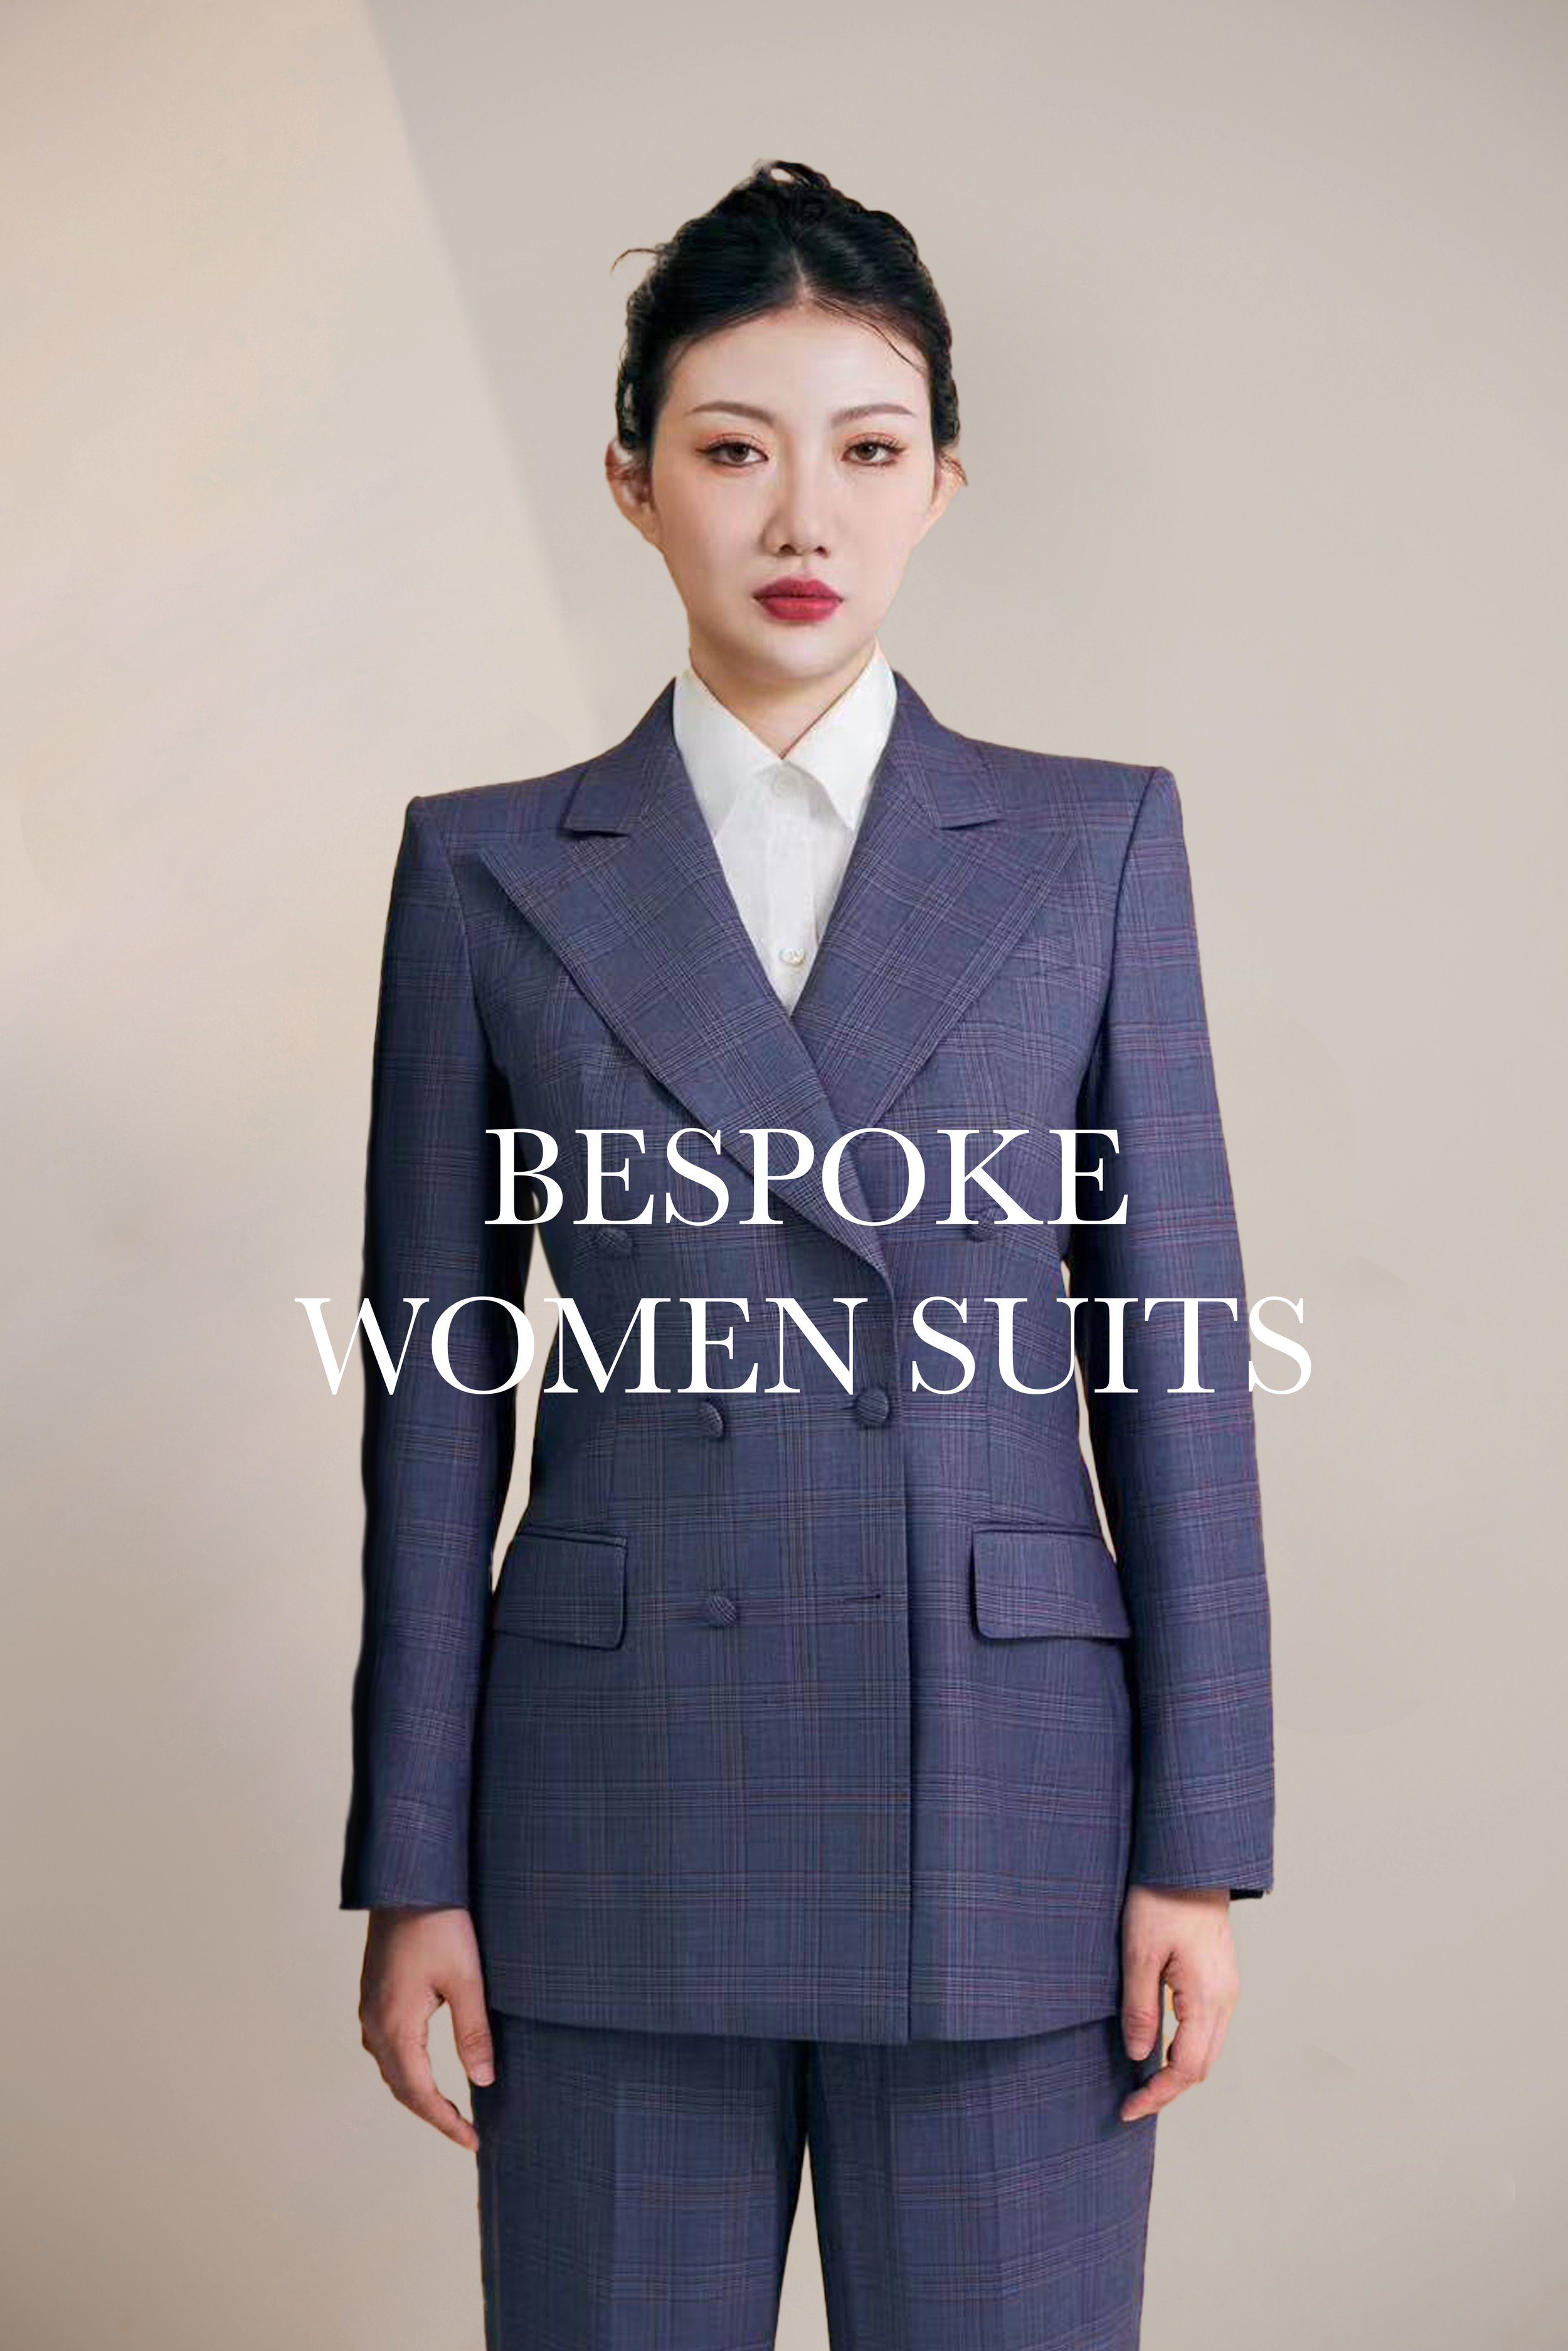 Women's Suit Made Suits Singapore tailor made suits bespoke tailor singapore suits ESCORIAL Standeven Made Suits Commonsuits sucks.jpg